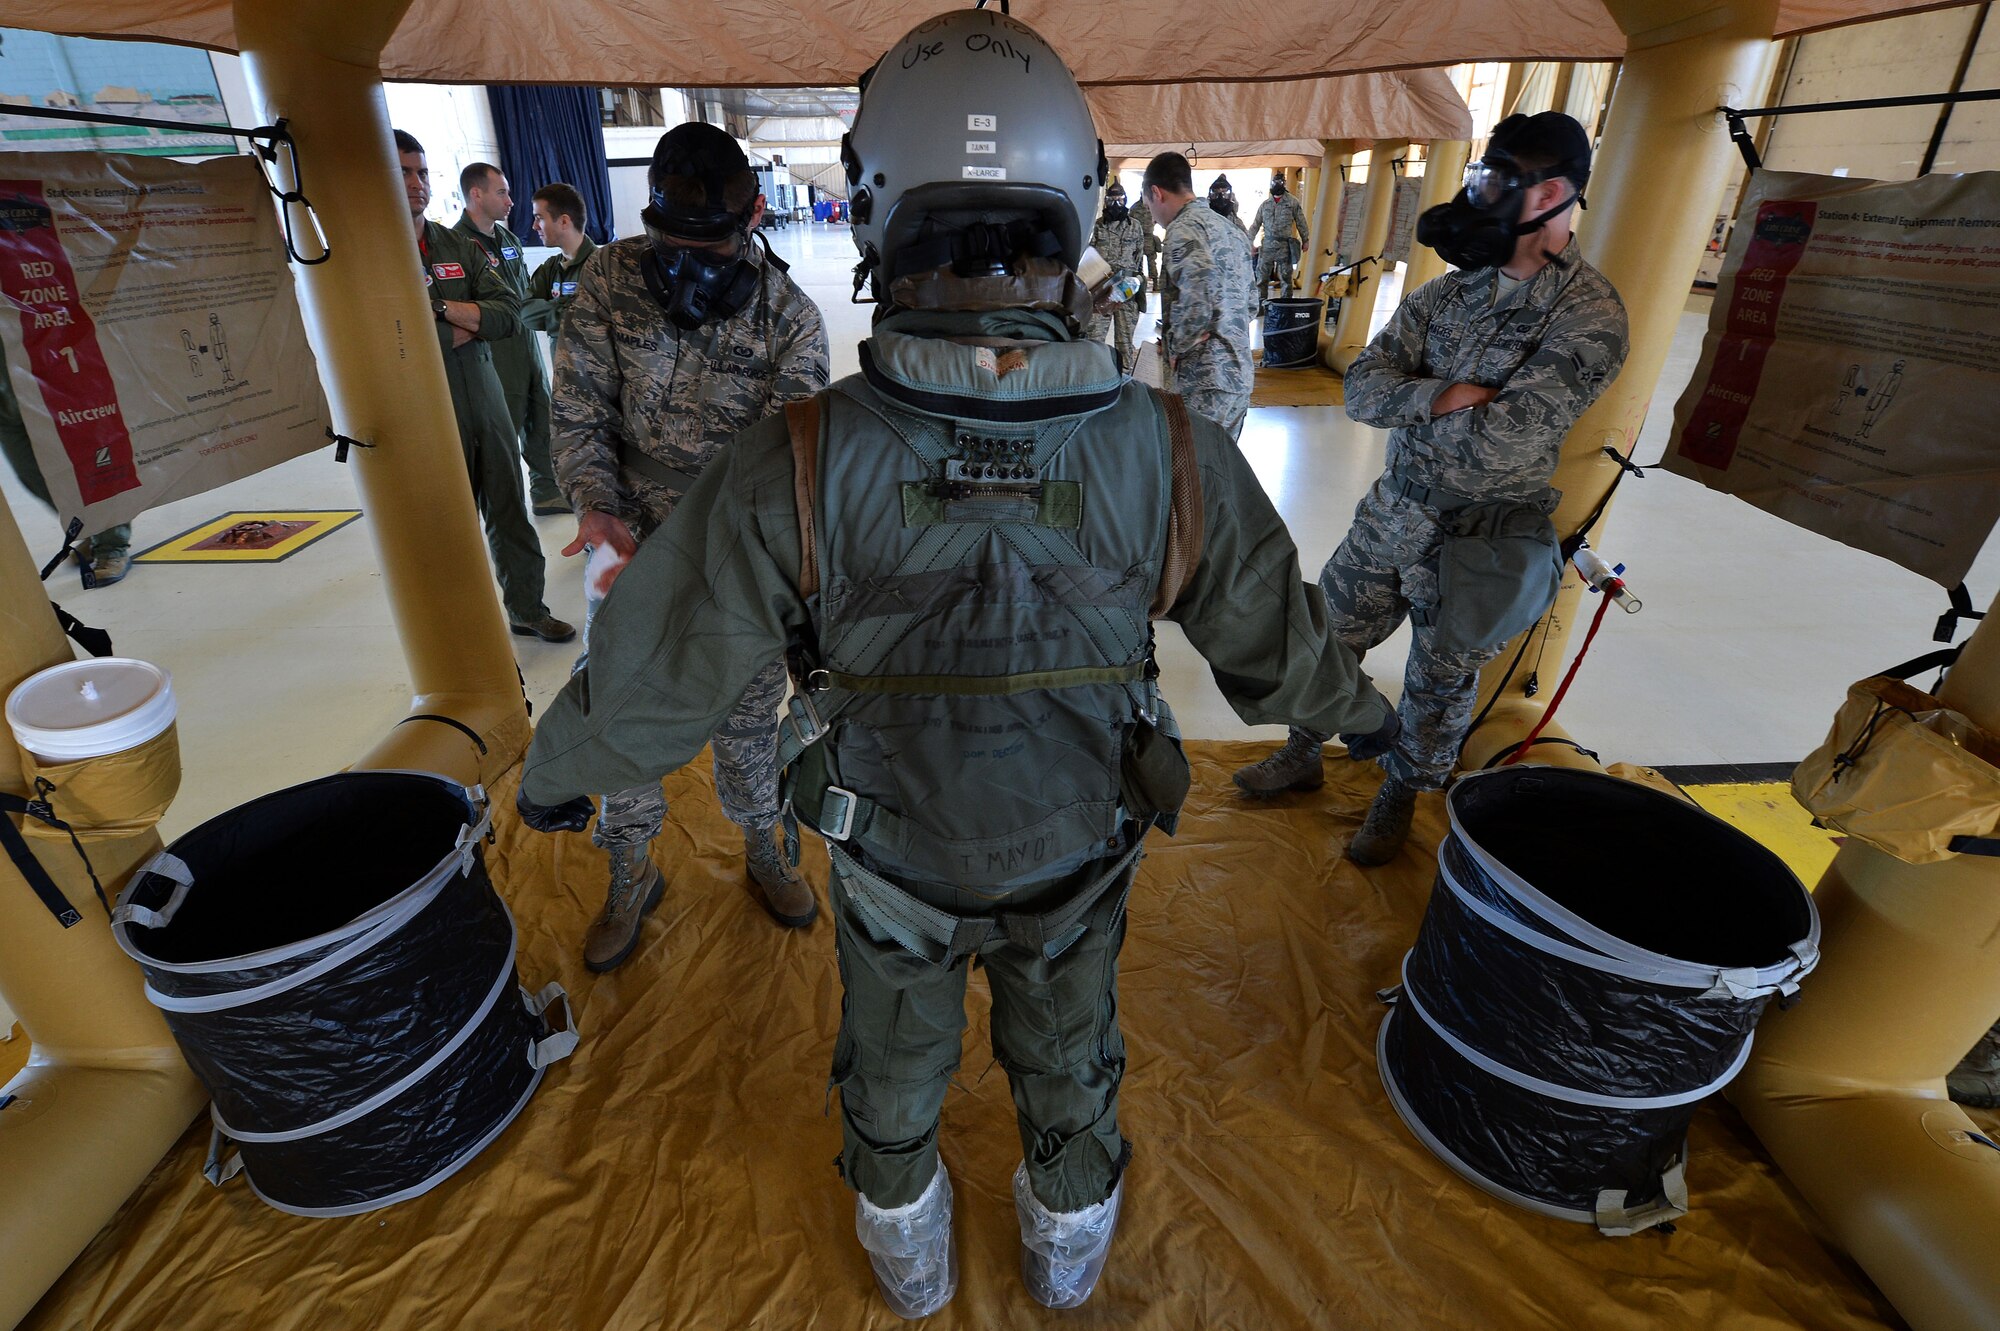 U.S. Air Force Airmen assigned to the 20th Operations Support Squadron mitigate a pilot during decontamination training at Shaw Air Force Base, S.C., Oct. 23, 2015. During the training, pilots and aircrew flight equipment Airmen practiced the actions they would take if a pilot became contaminated during flight. (U.S. Air Force photo by Senior Airman Michael Cossaboom)